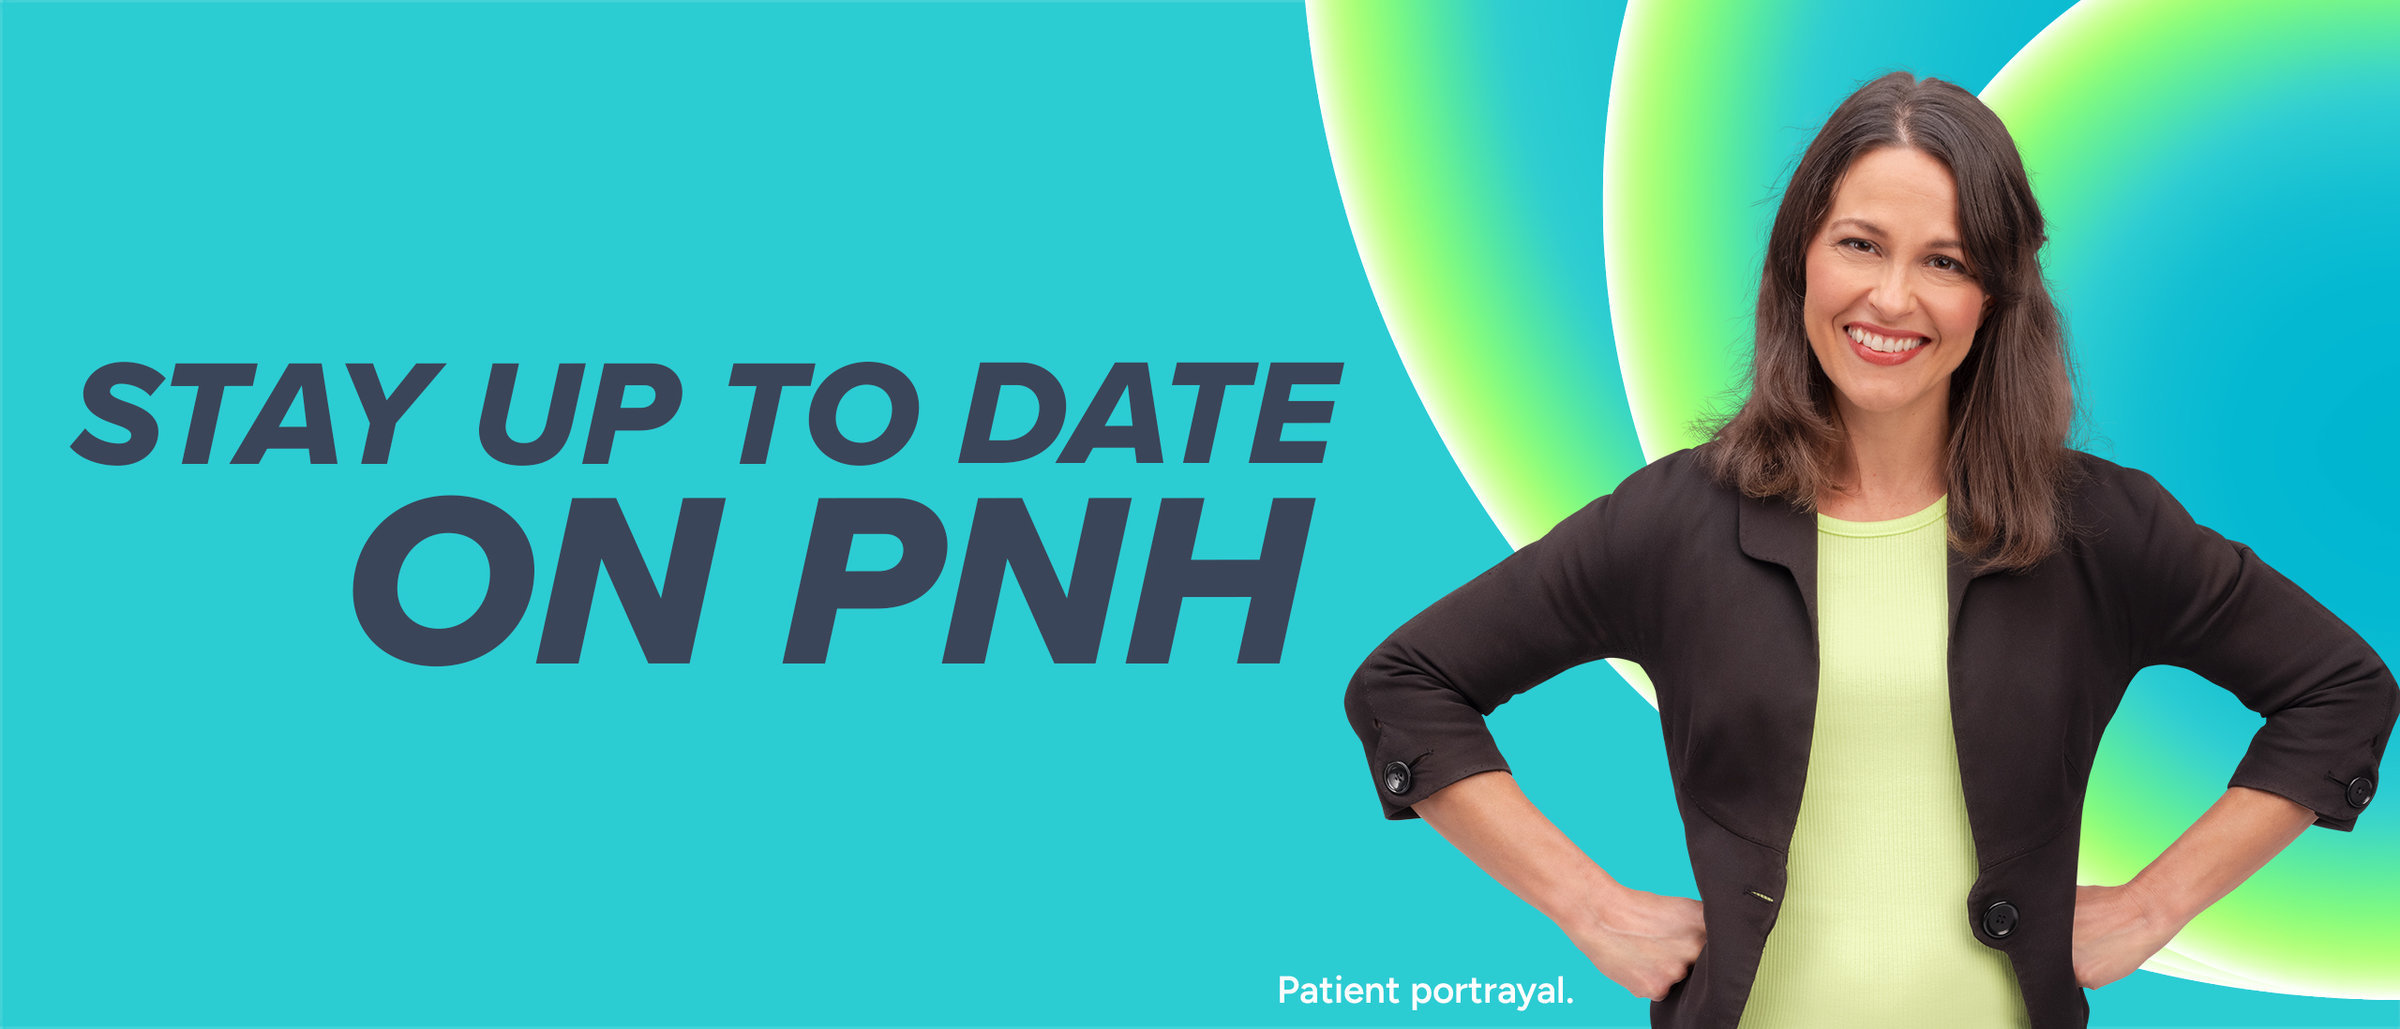 Stay up to date on PNH